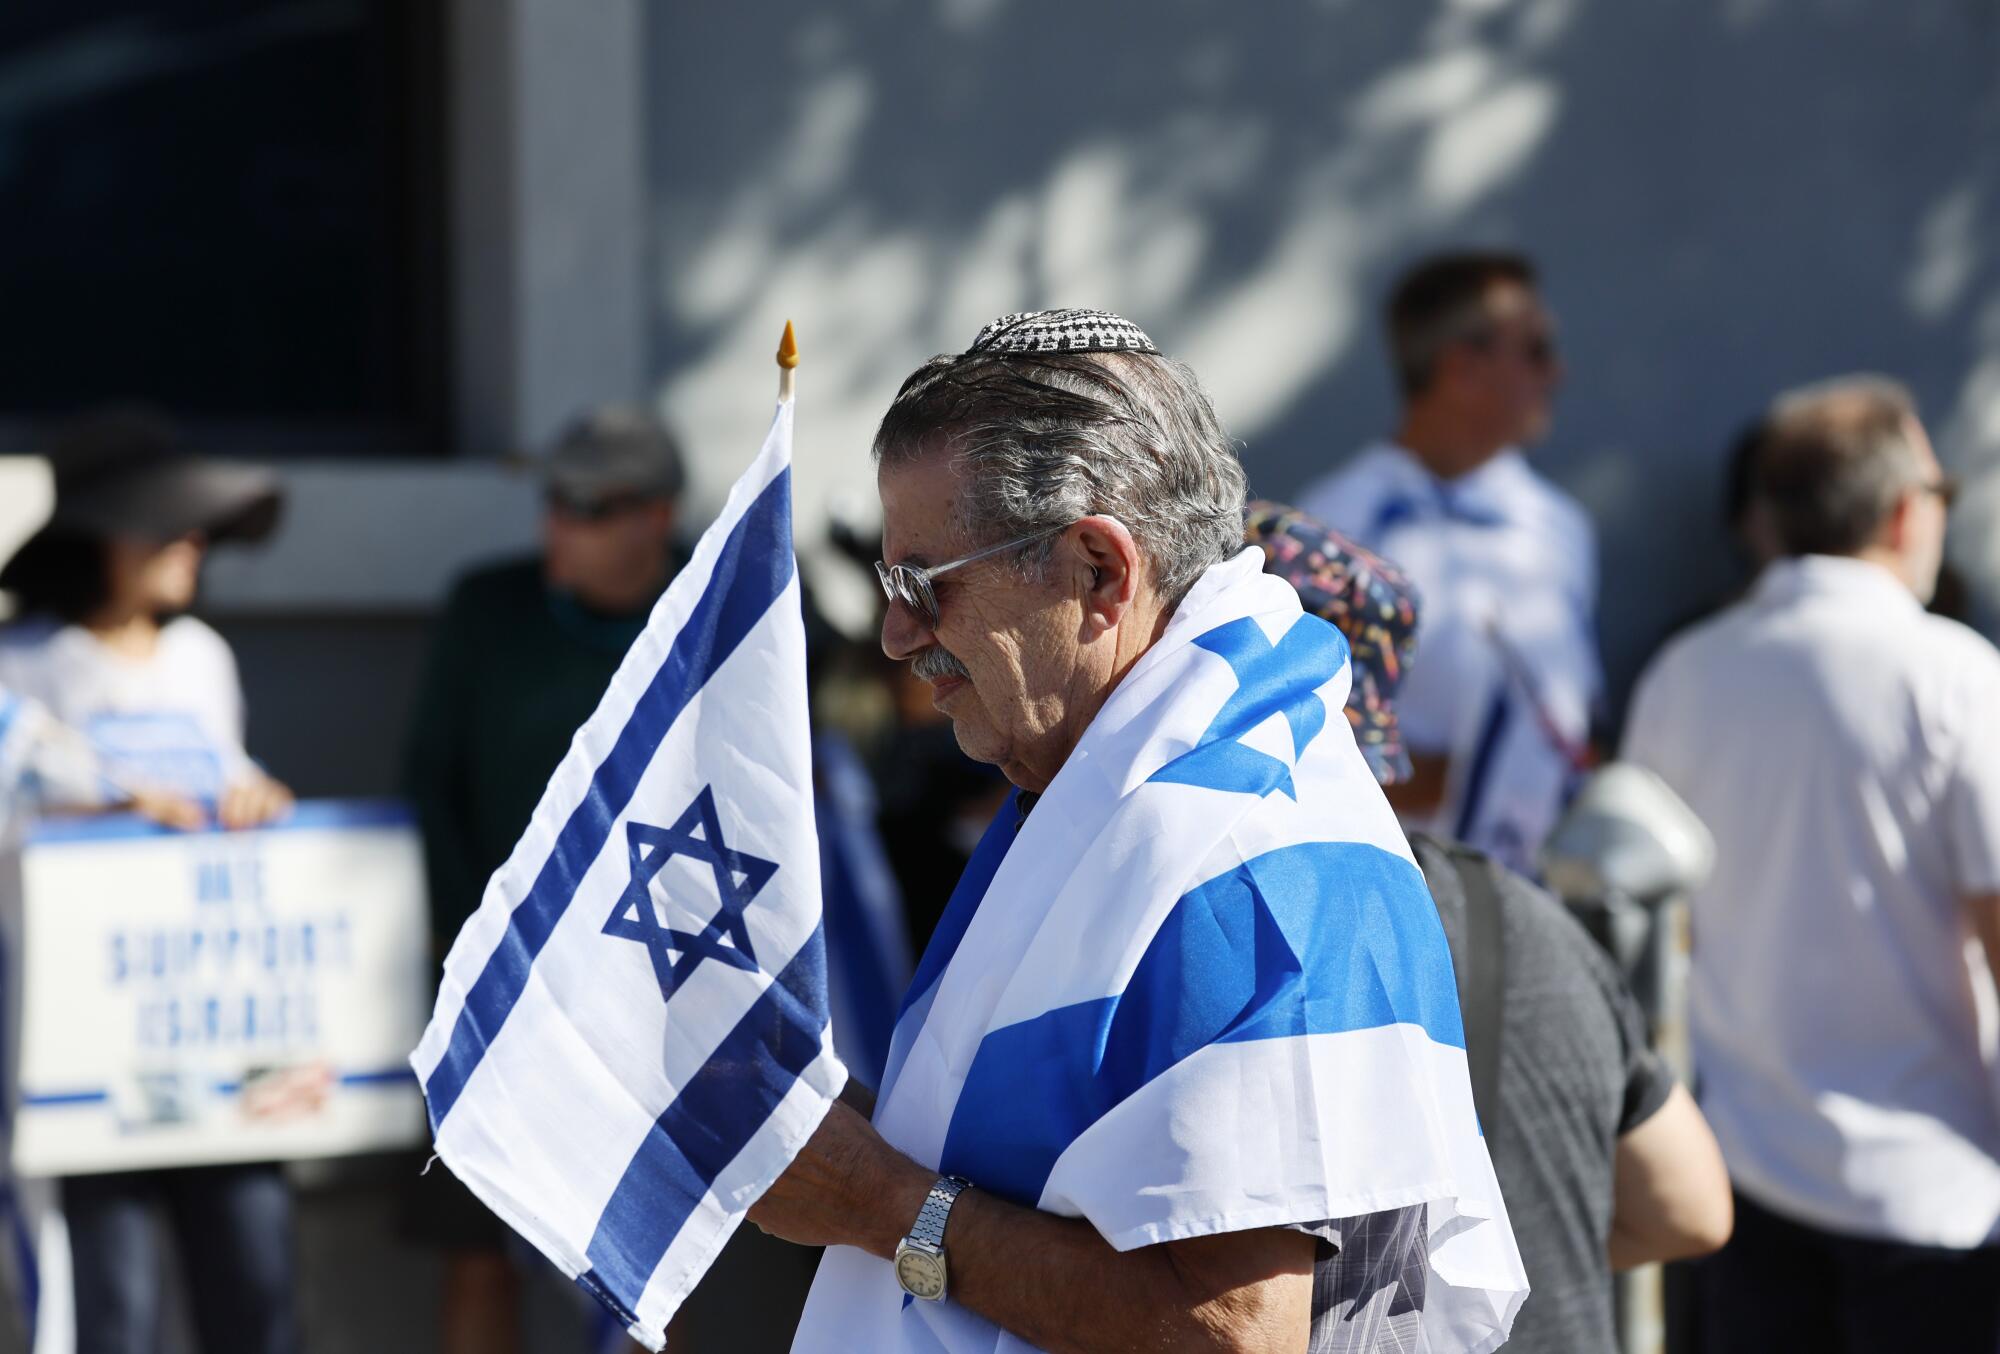 A man participates in the solidarity march for Israel in Los Angeles.